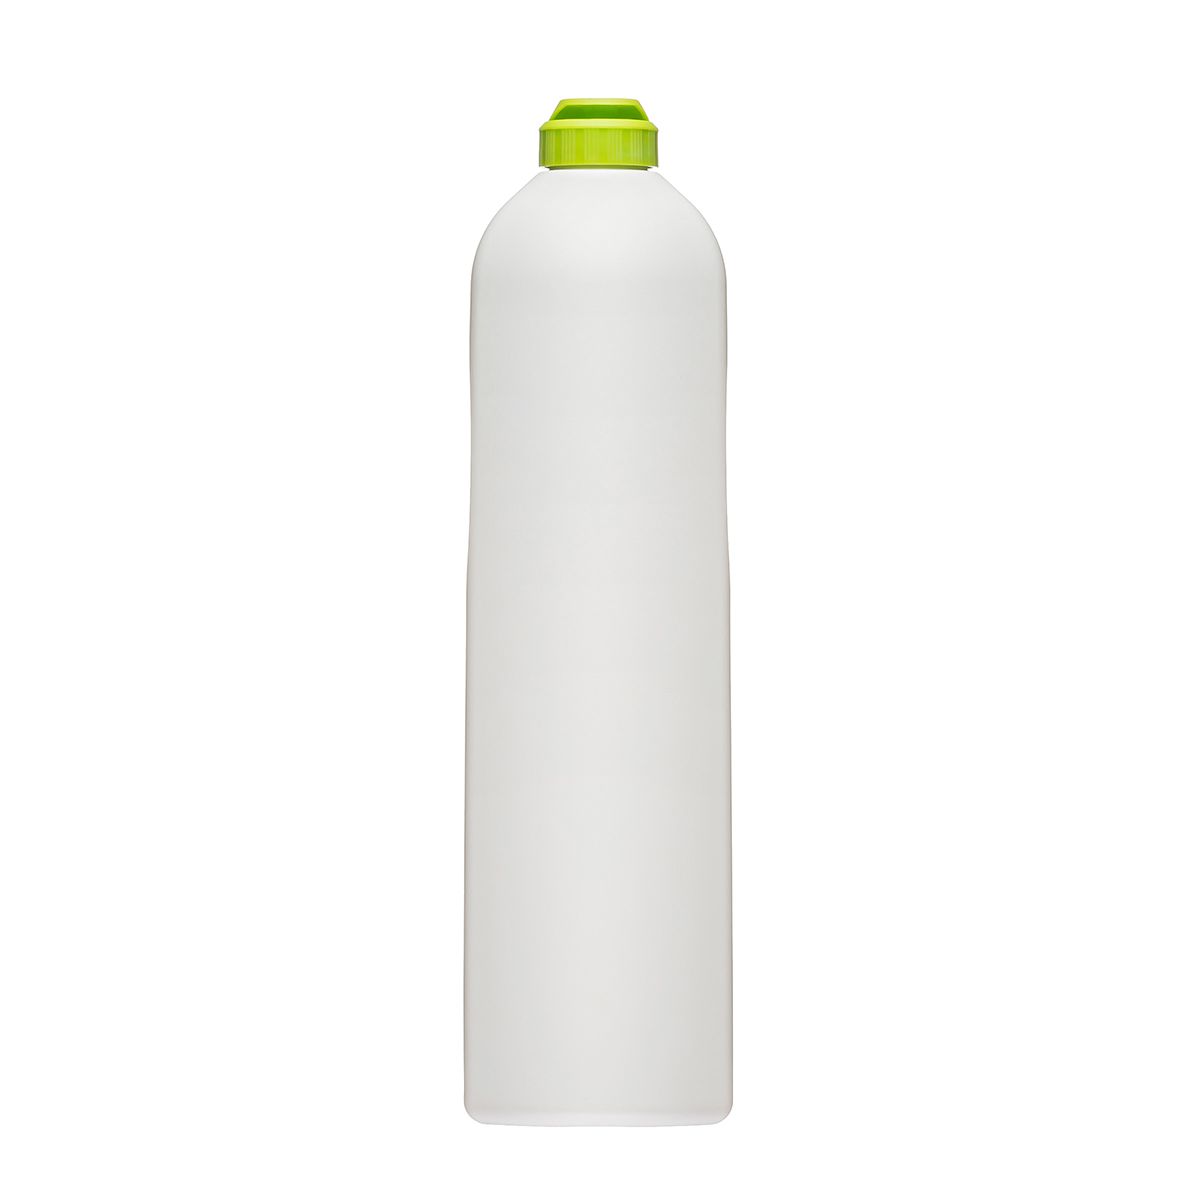 The 500 ml HDPE bottle Grand 500 is perfect choice for any product in household chemicals.